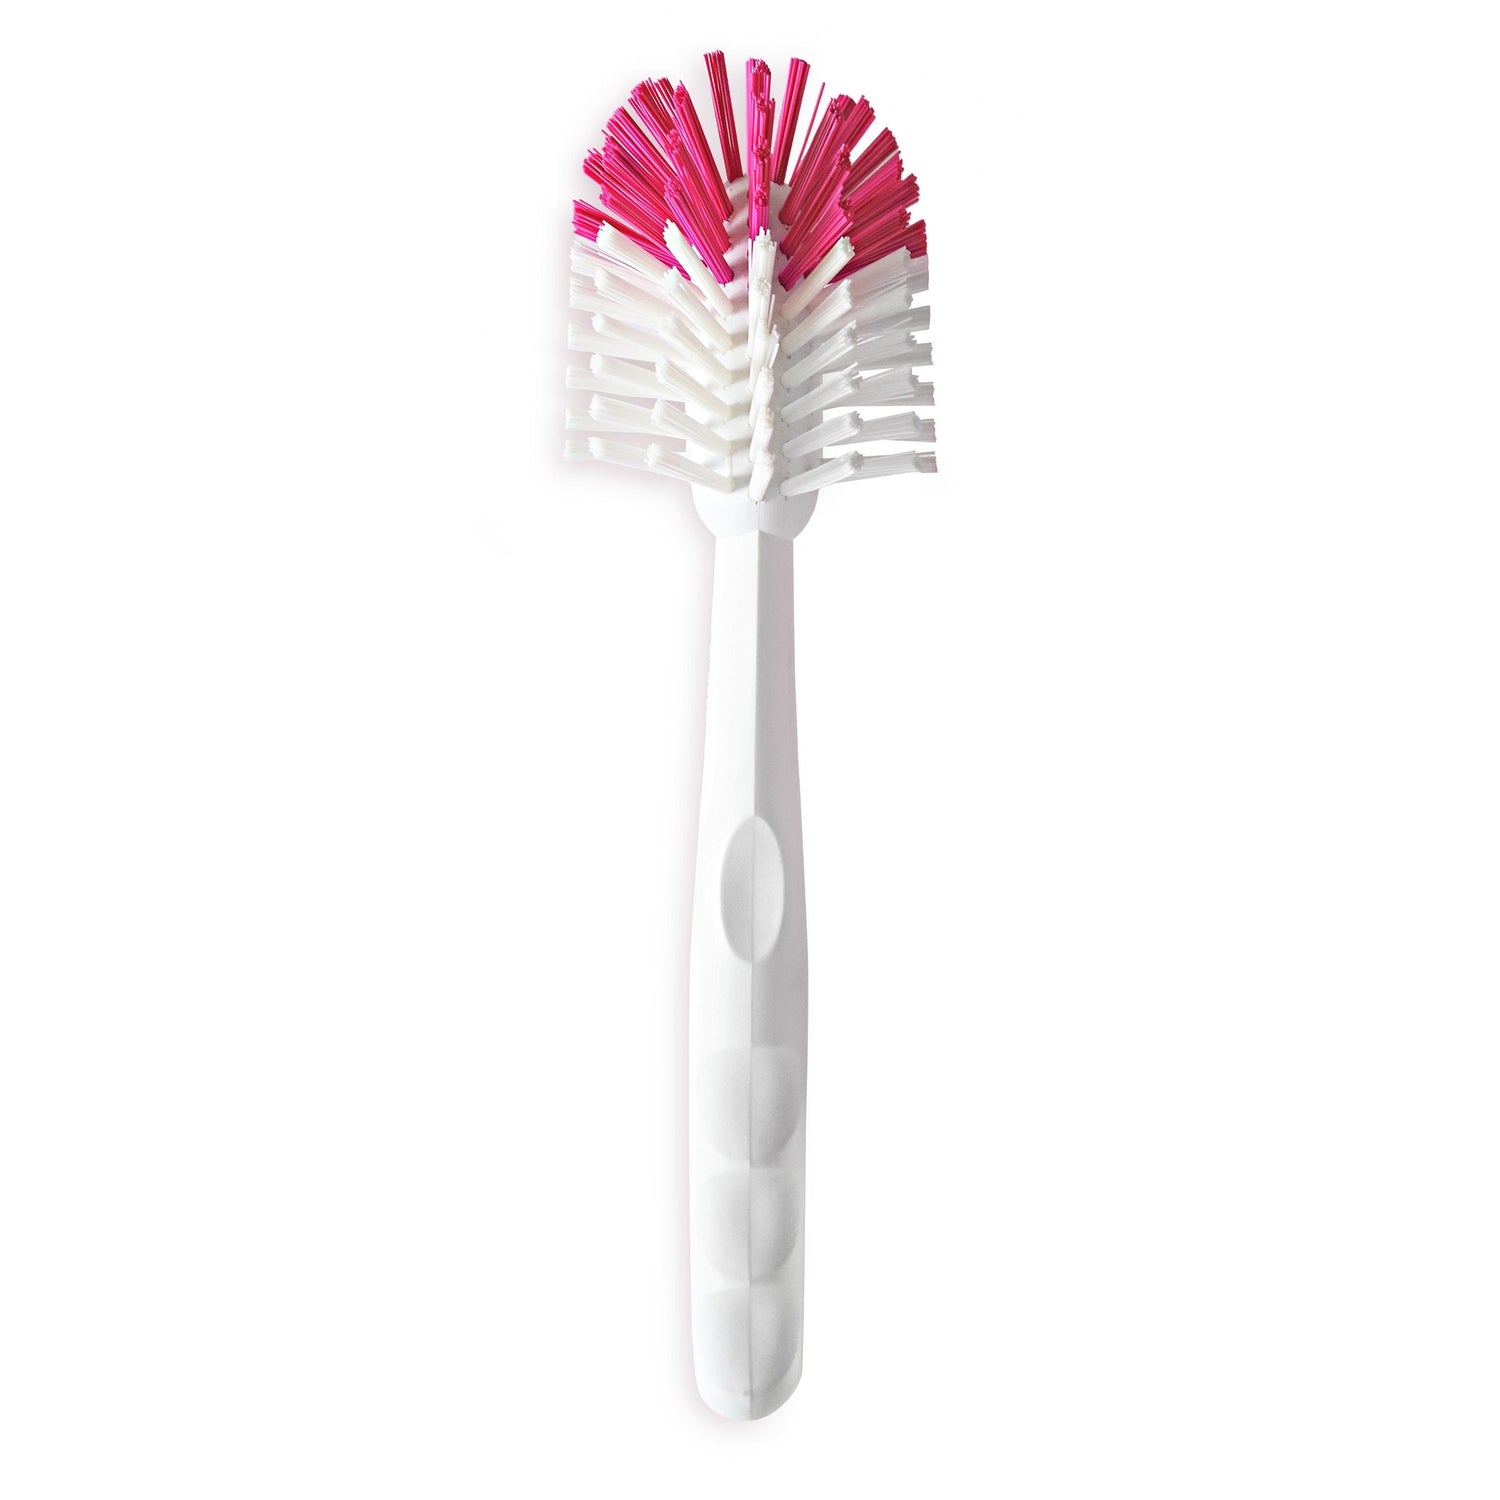 Pretty & Pink Dish Brush Scrubber - Scratch Free Cleaning-Cleaning Brushes-Fuller Brush Company